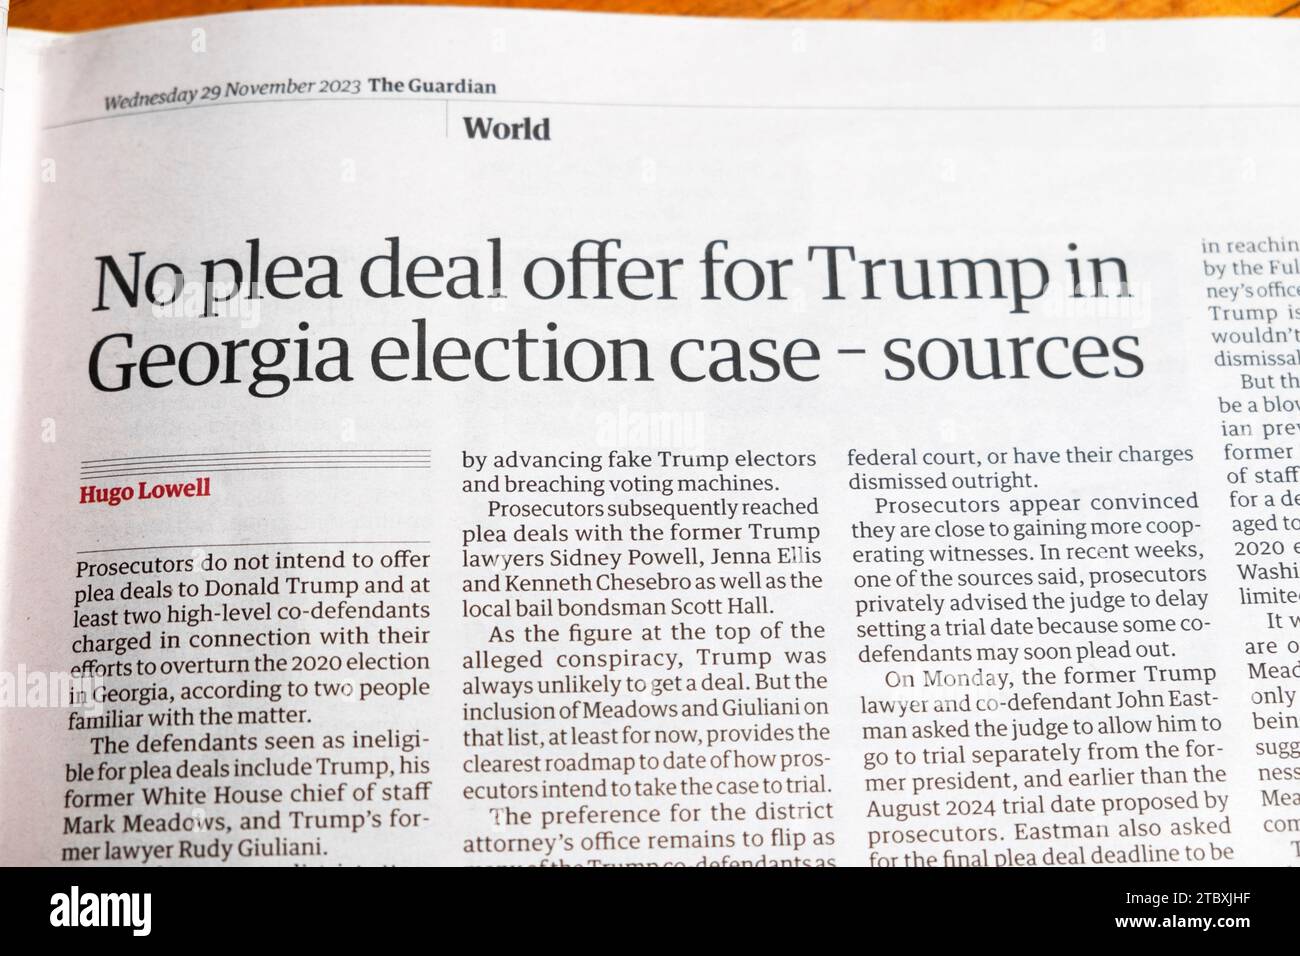 "No plea deal offer for (Donald) Trump in Georgia Election Case - Sources" quotidiano Guardian headline 2020 Election Court article 29 November 2023 UK Foto Stock